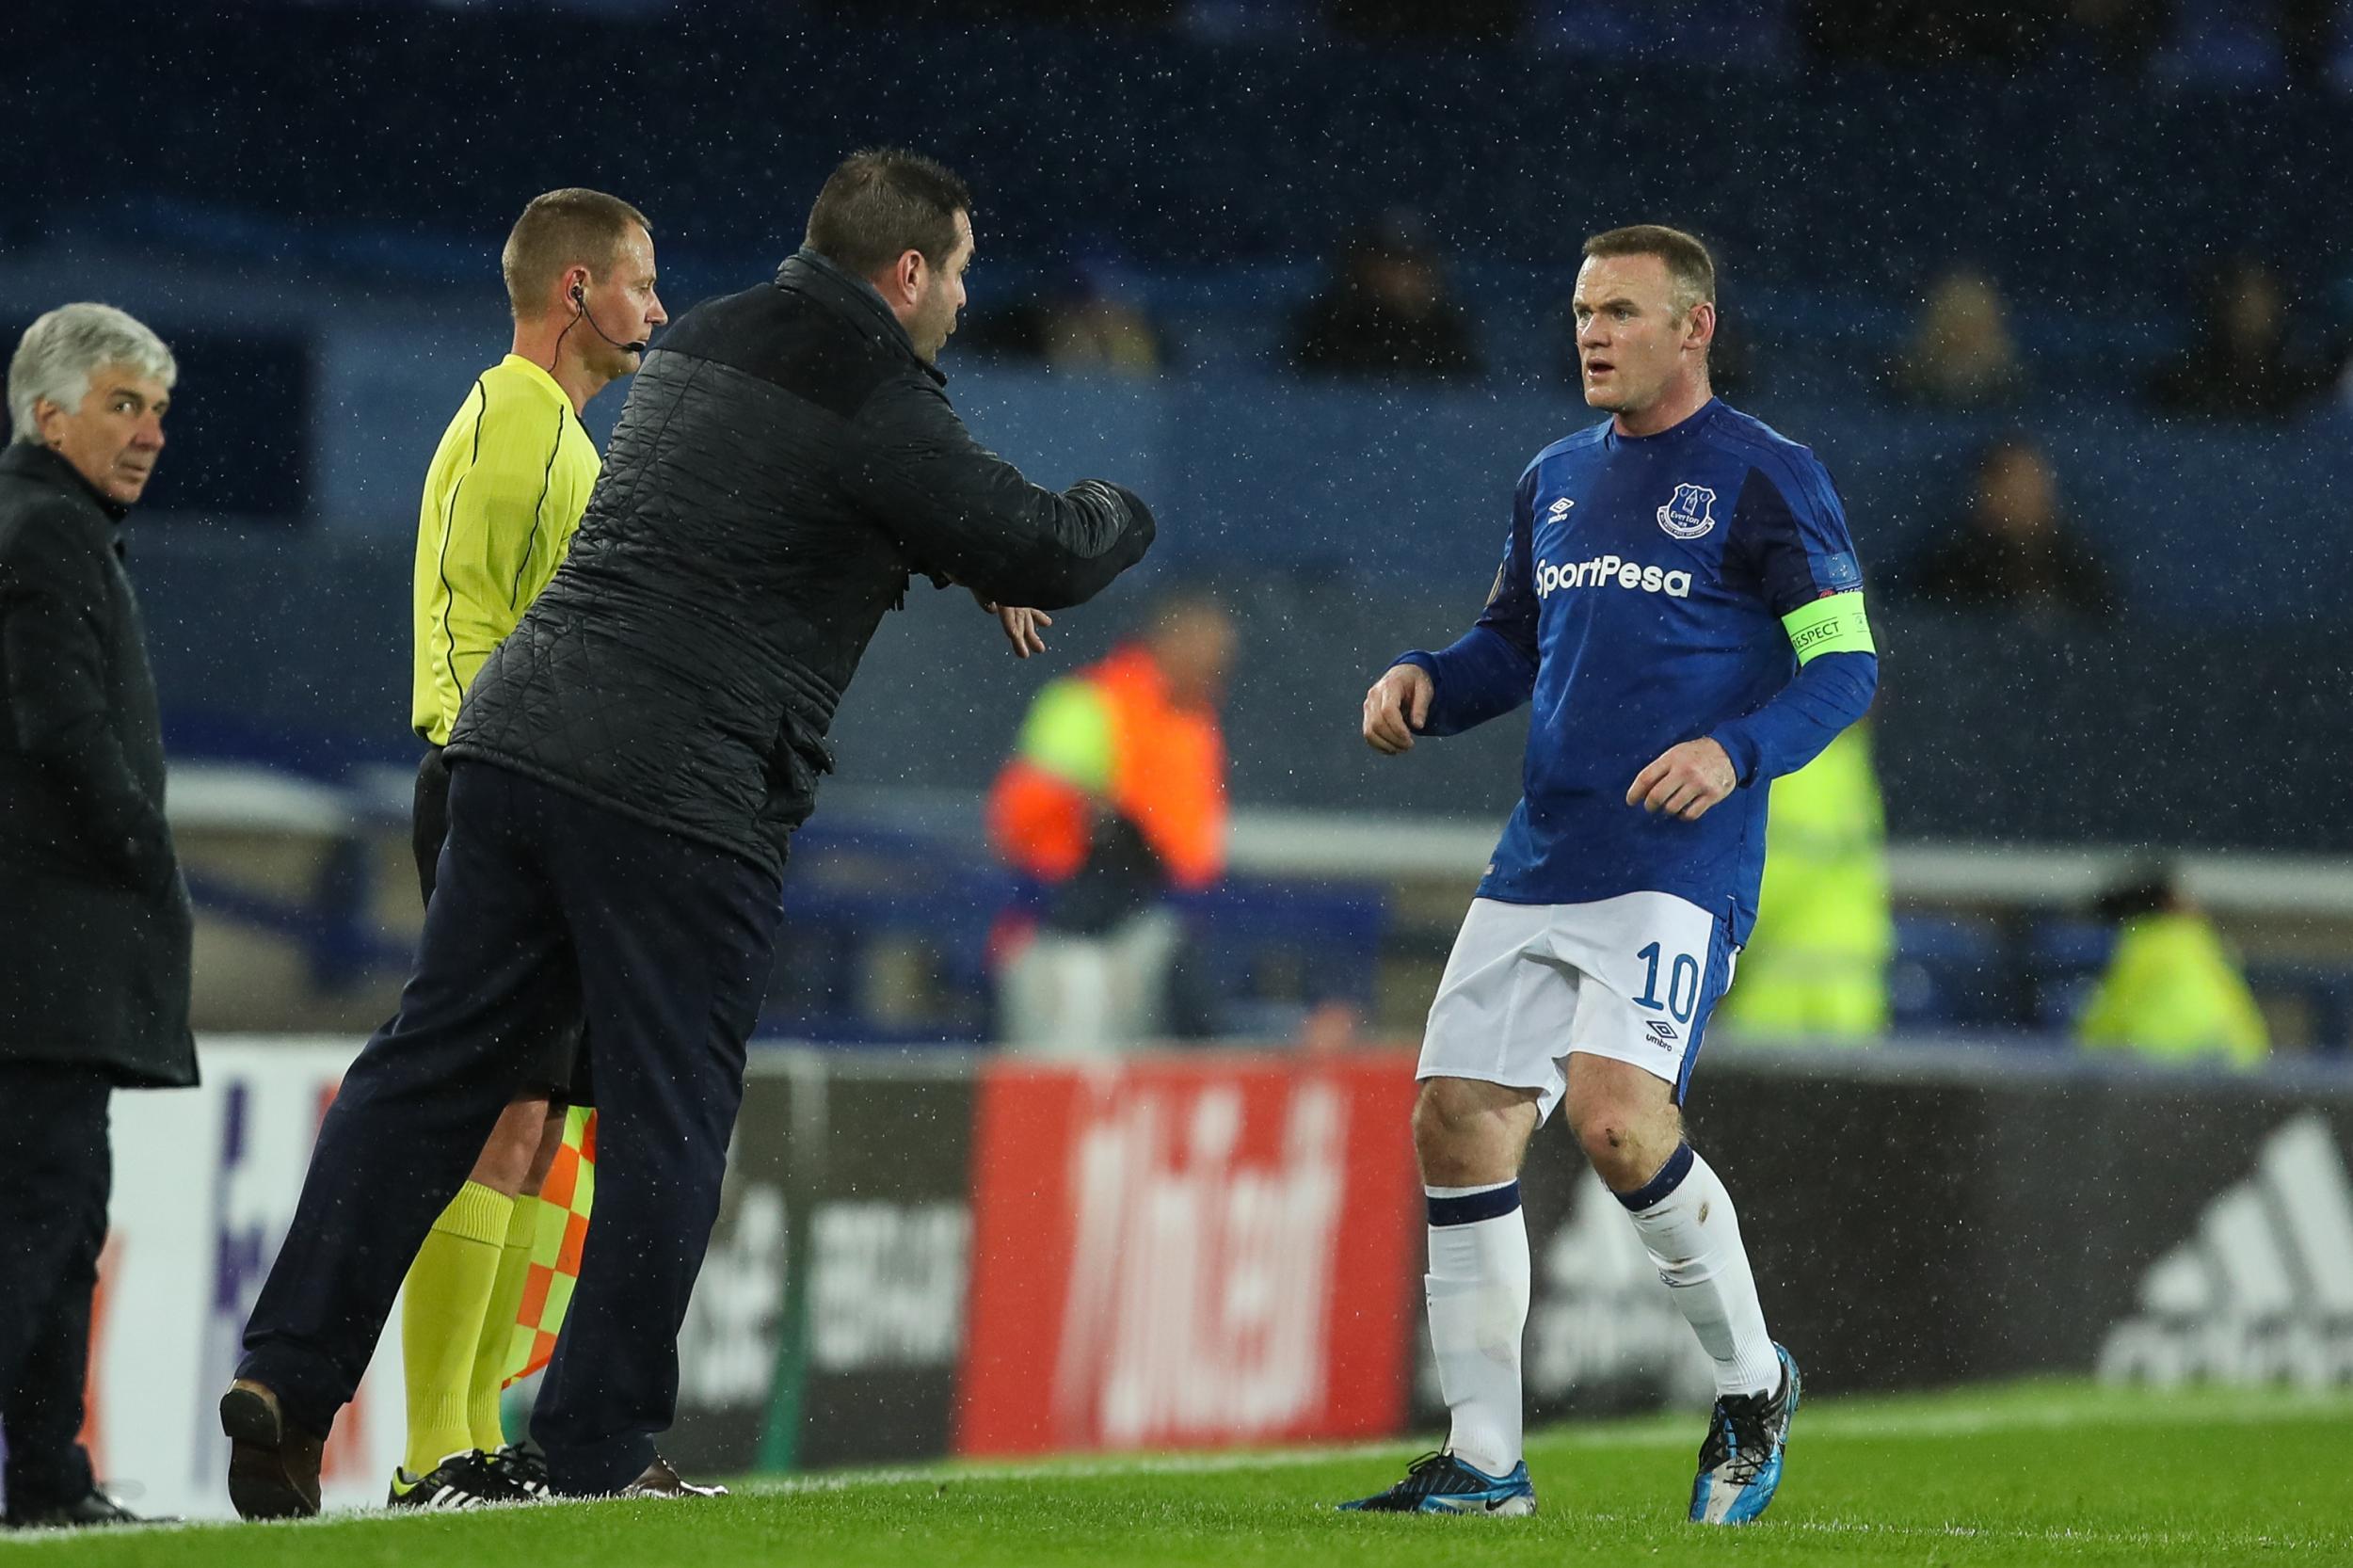 Wayne Rooney receives instructions from David Unsworth